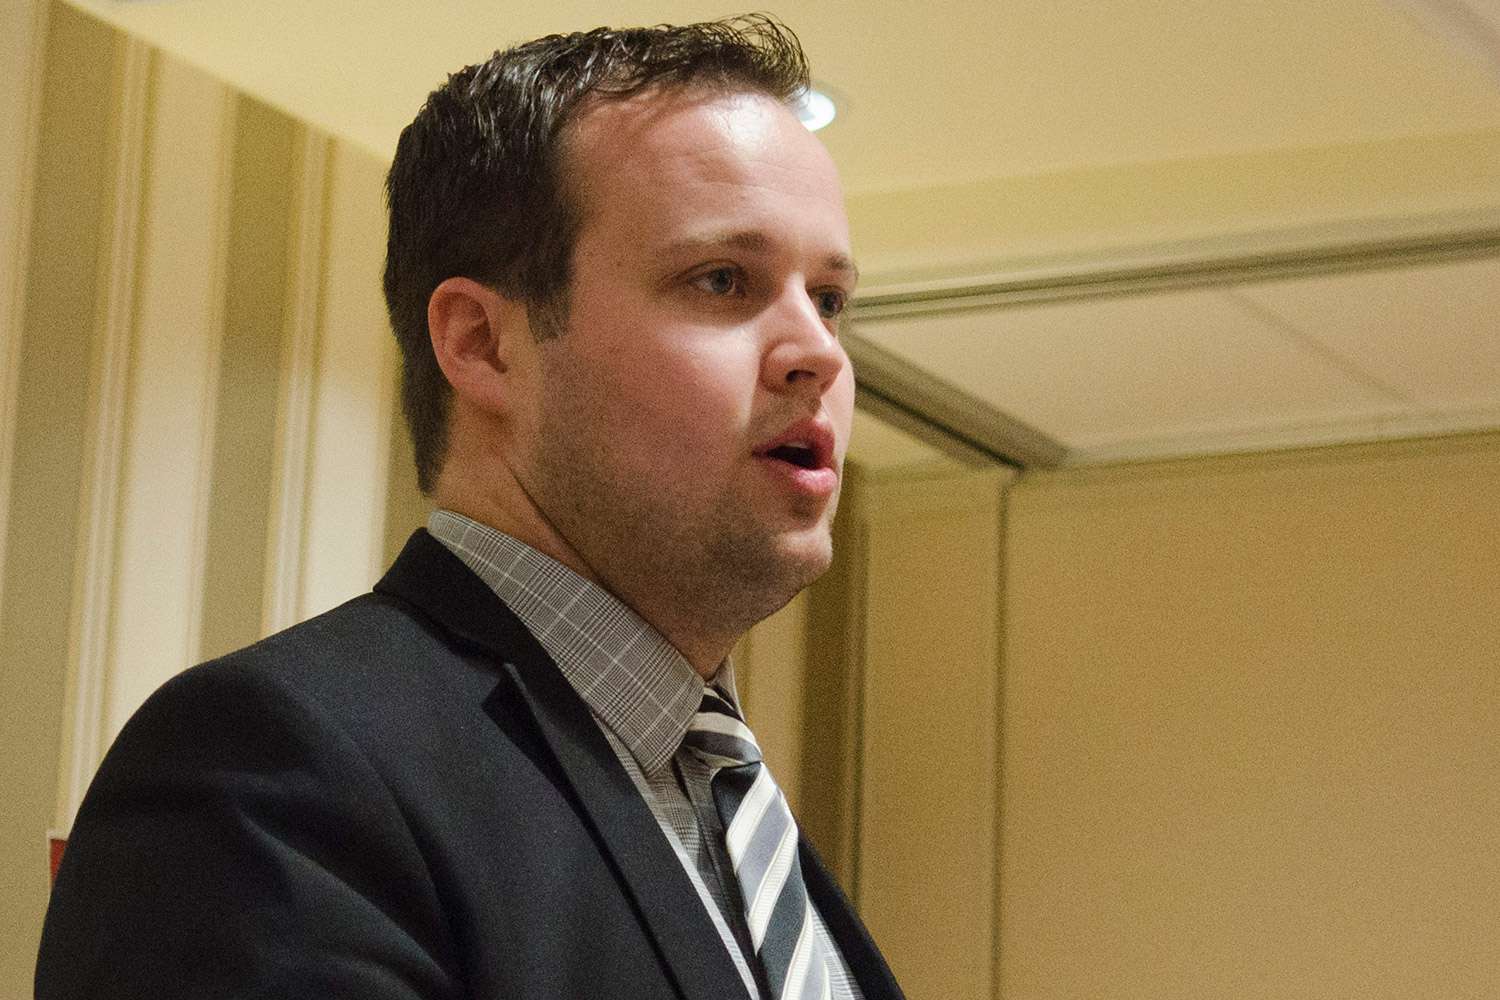 Josh Duggar Child Porn Case: Why Motions to Dismiss Evidence Were Denied by Judge